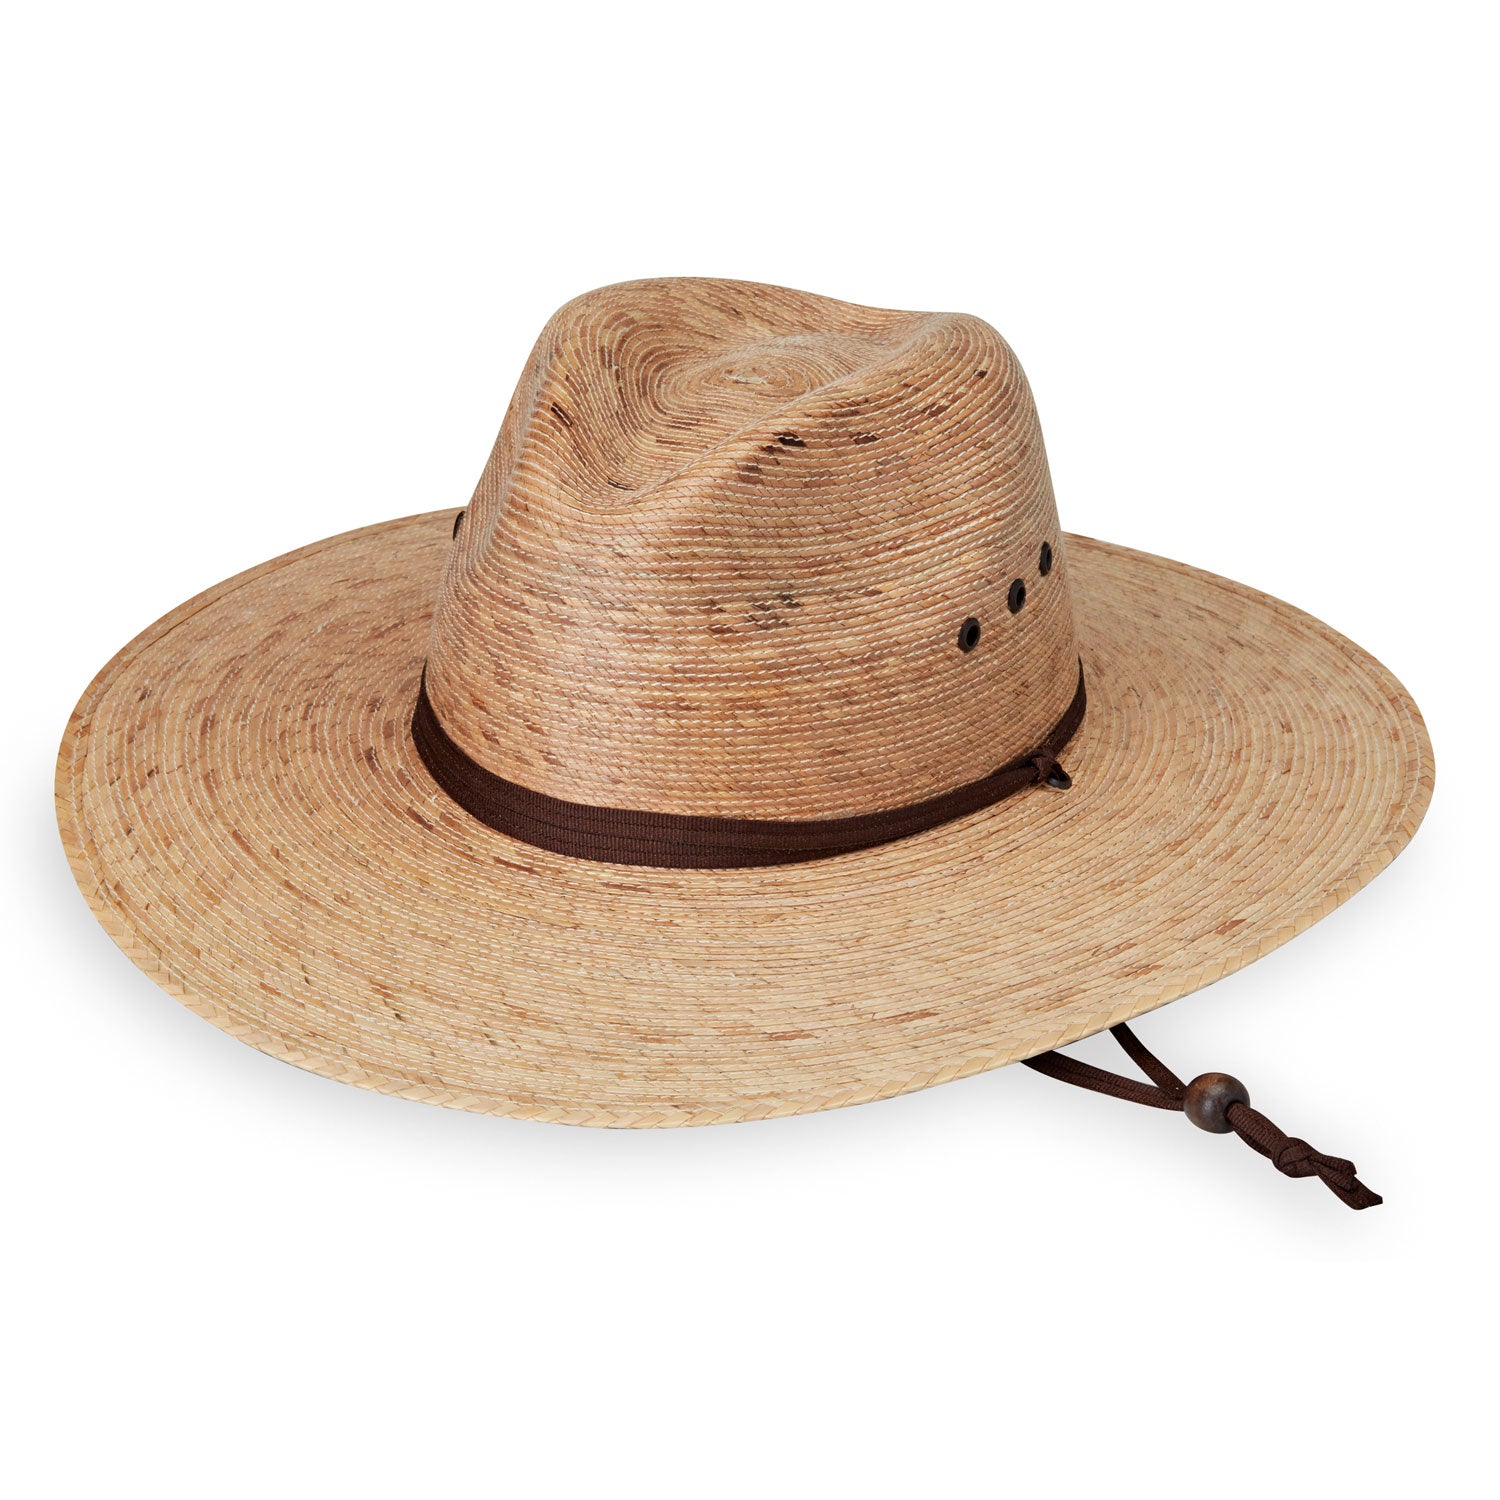 Featuring Fedora Style Baja UPF Straw Sun Hat with Chinstrap in Camel from Wallaroo